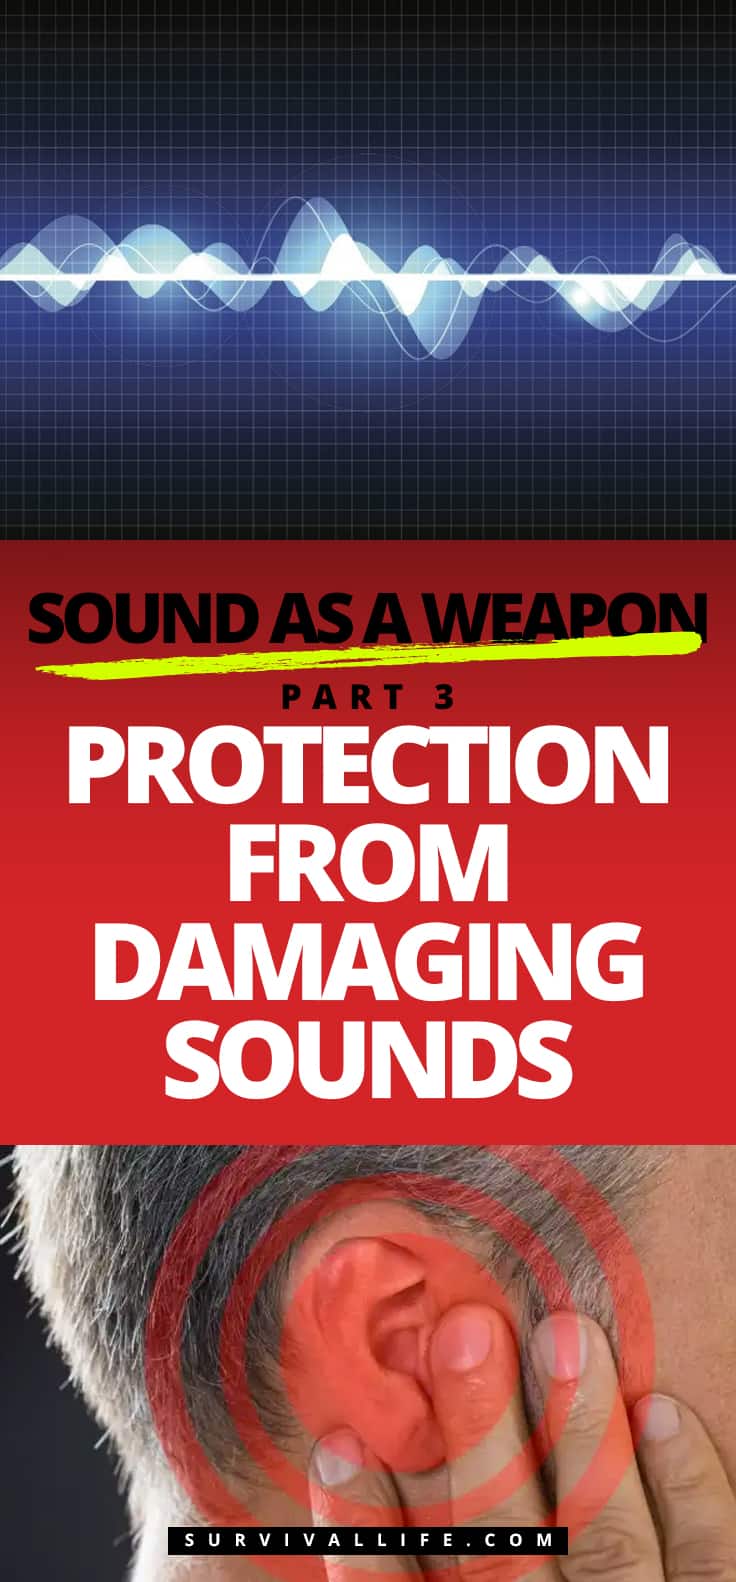 Sound as a Weapon Part 3: Protection from Damaging Sounds